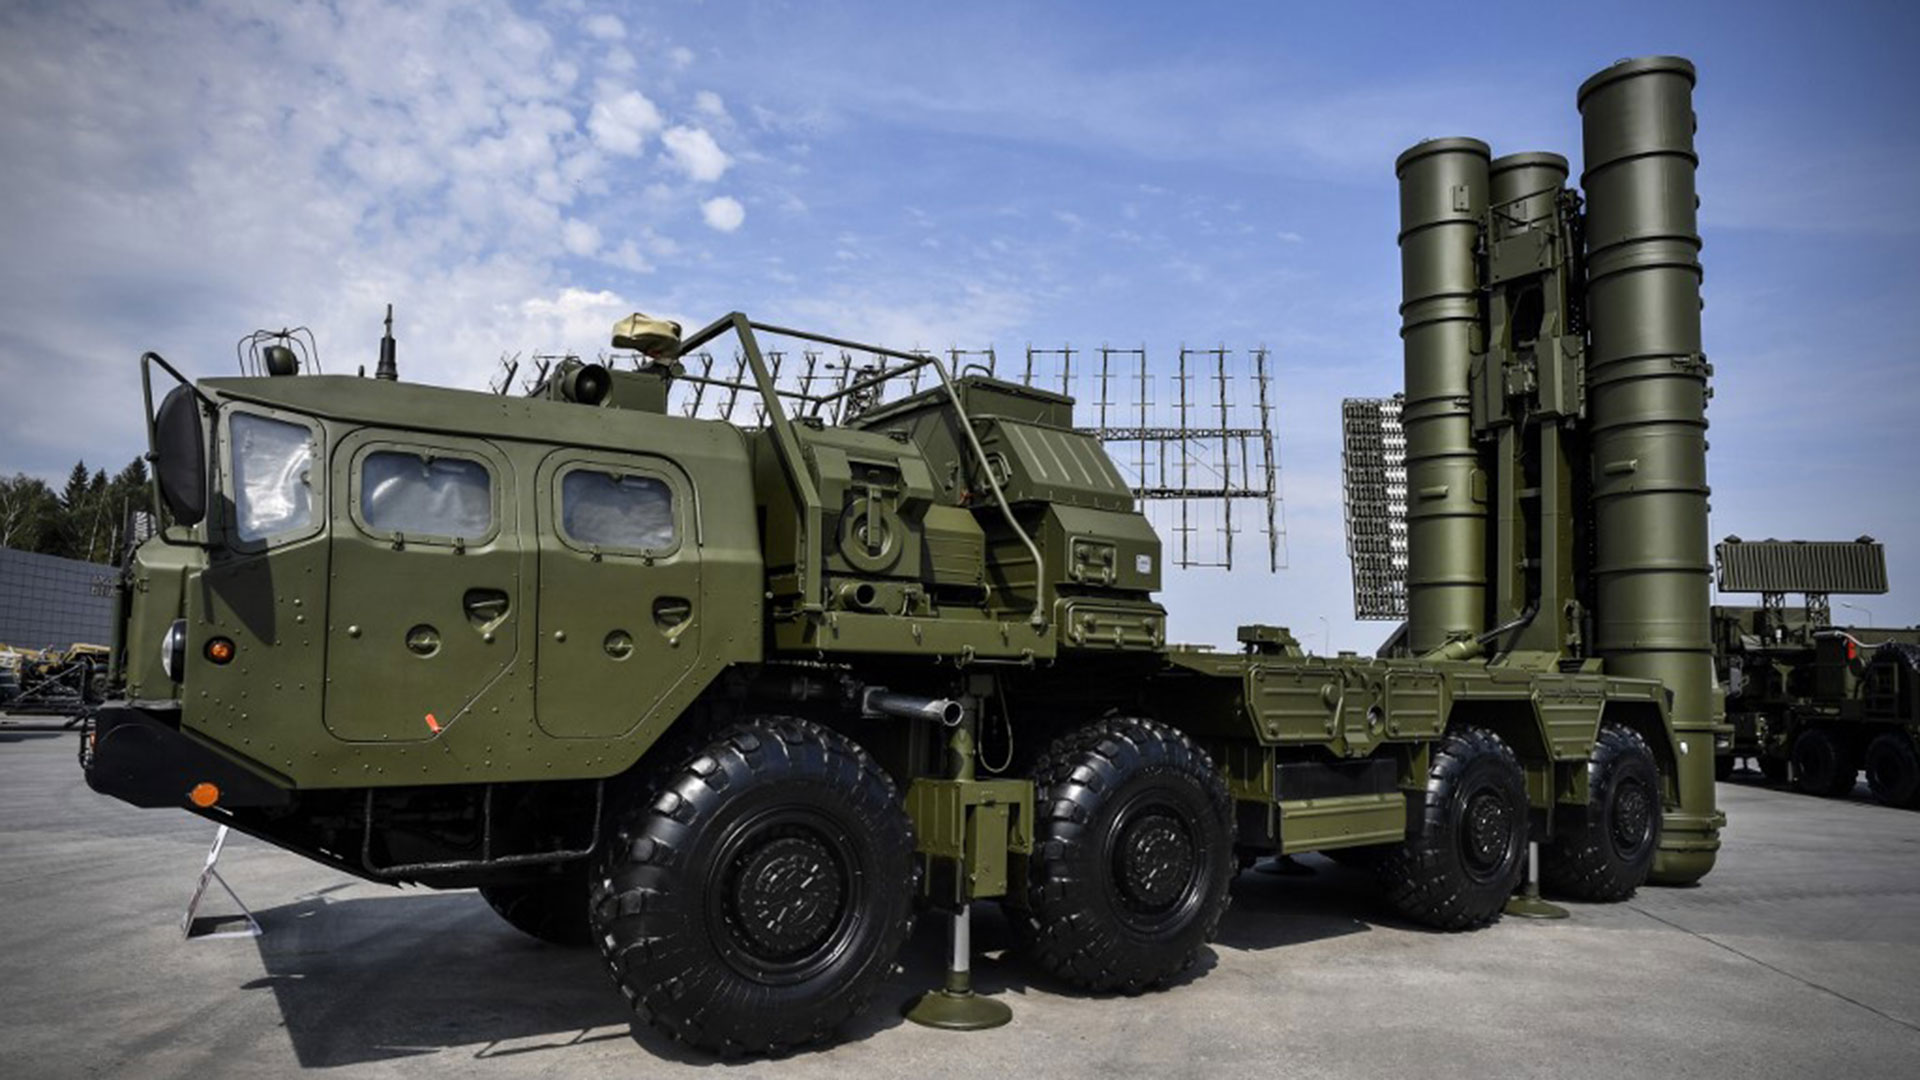 A Russian S-400 anti-aircraft missile system purchased by Turkey (Photo by Alexander NEMENOV / AFP)